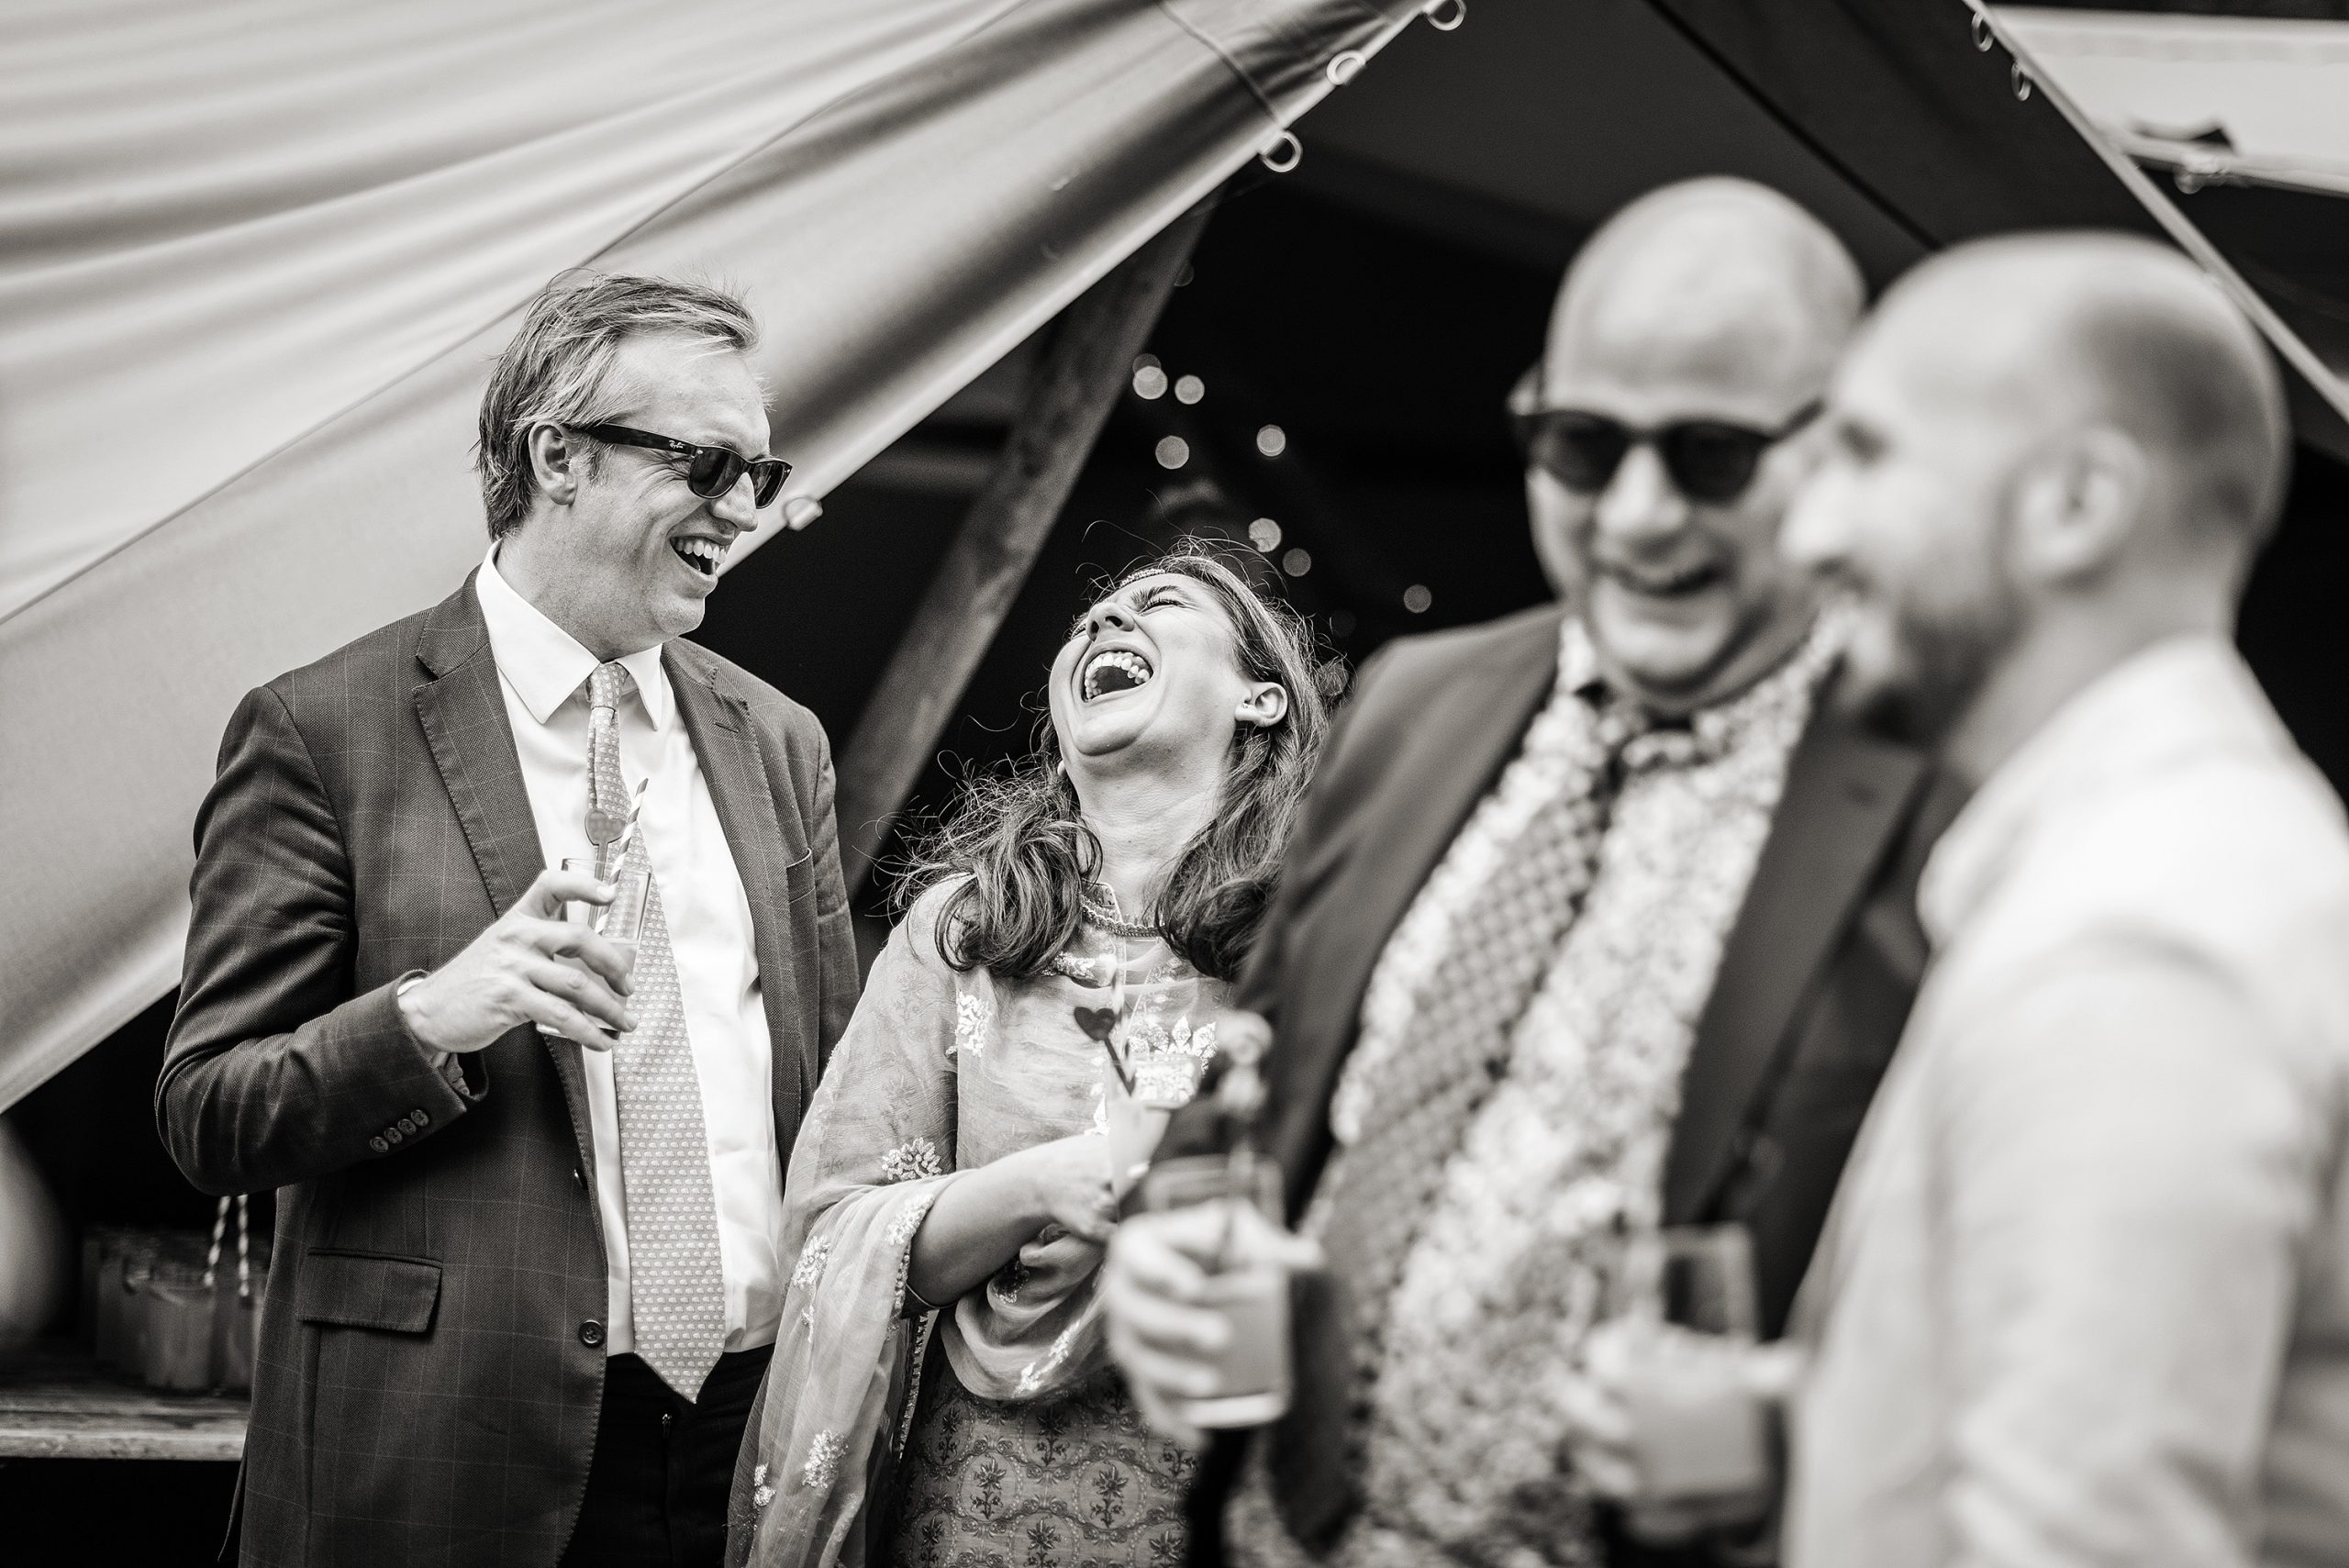 Laughing and relaxed guests at a marquee wedding celebration